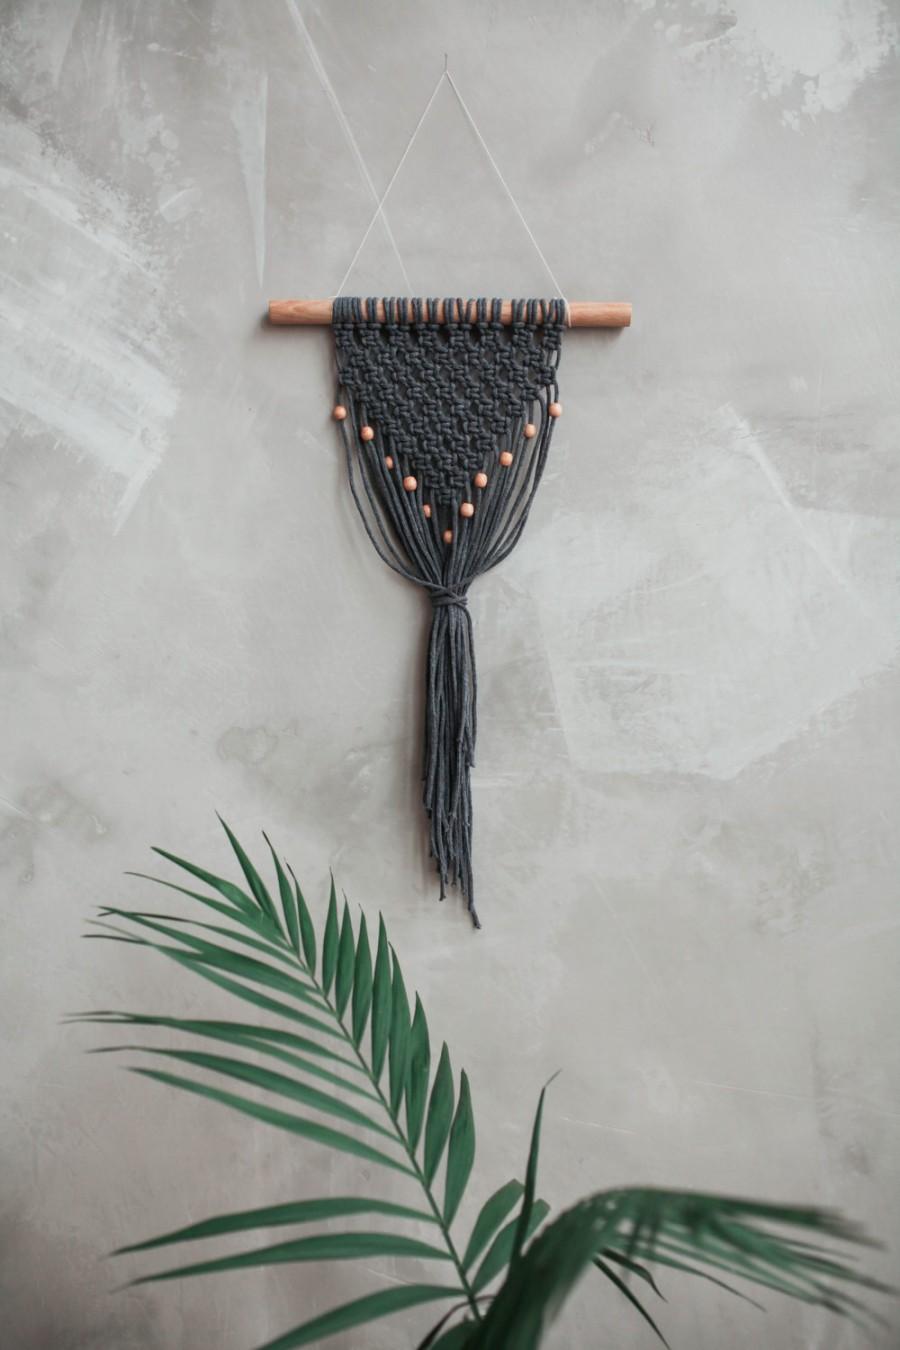 Mariage - Macrame Wall Hanging on an Oak Stick. Dark Grey Color Cotton Rope with Wooden Beads. Modern Wall Decor. New Minimalist Design Wall Art